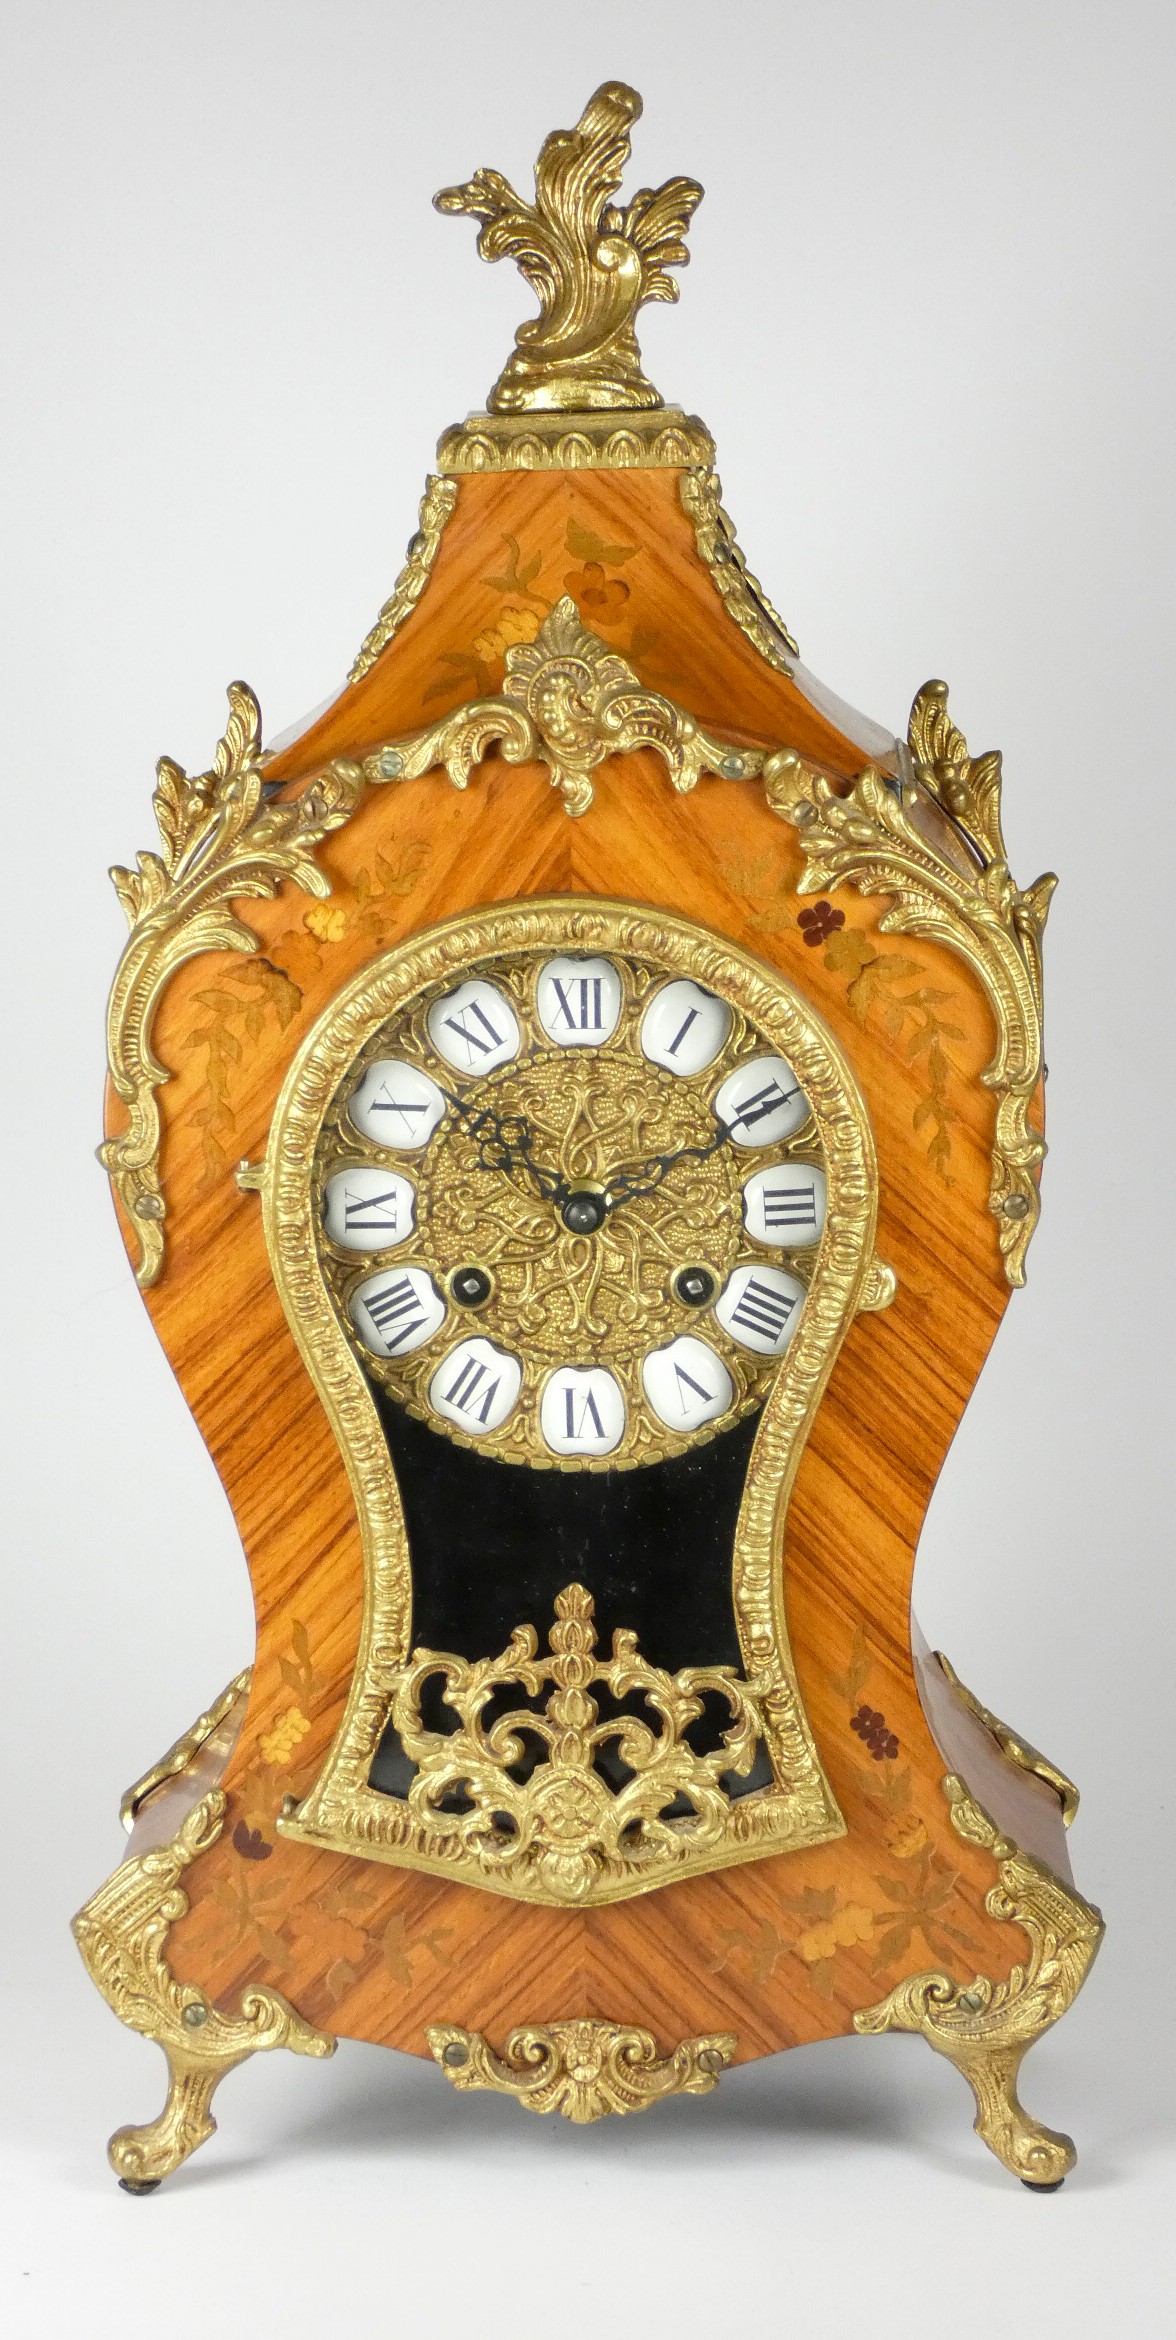 A late 19th century Louis XVI style Boule mantel clock, inlaid walnut case with applied embossed